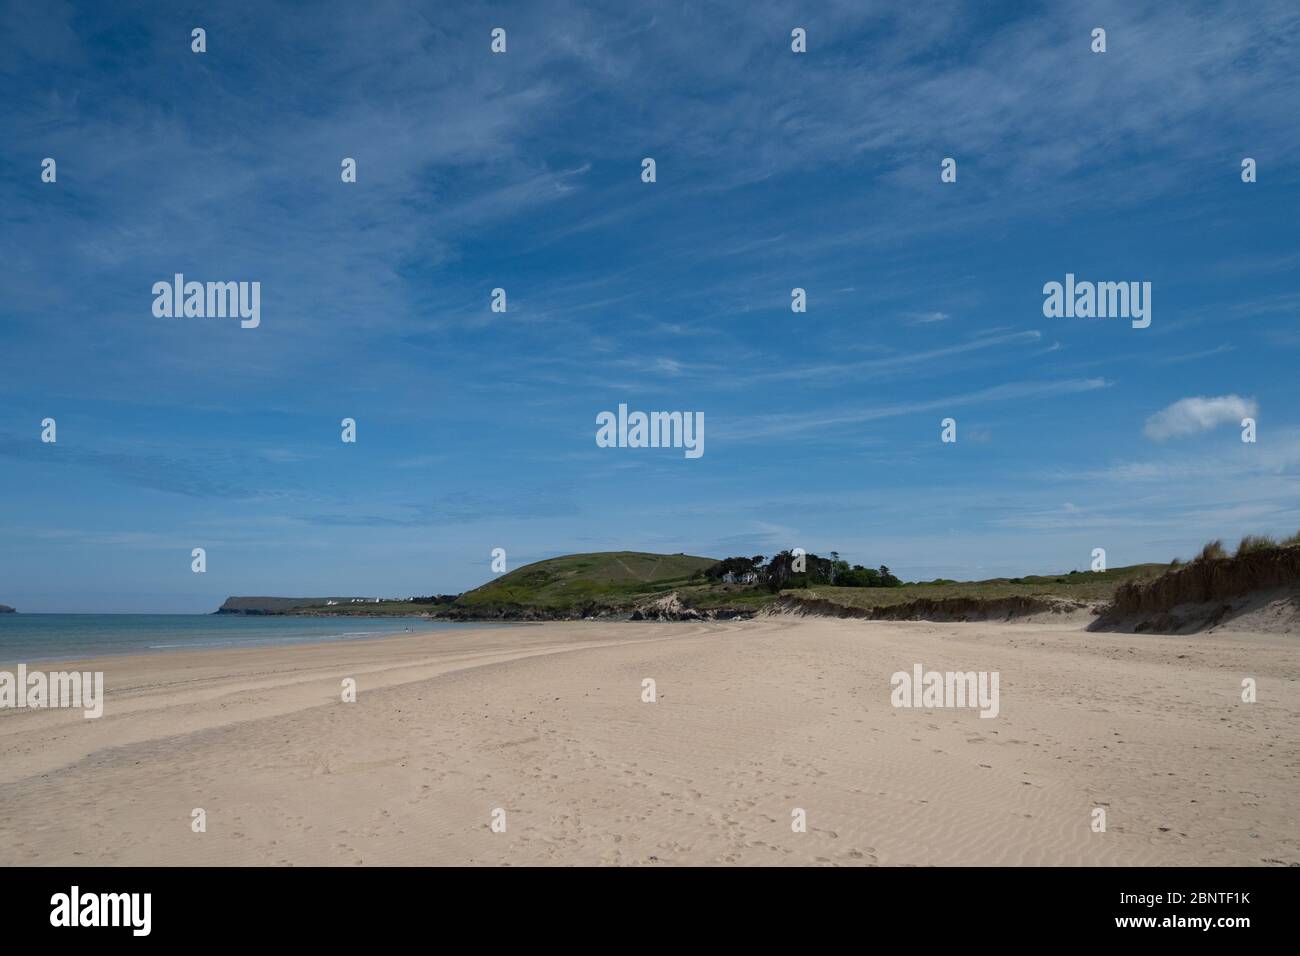 Rock, Cornwall, UK. 16th May 2020. UK Weather. The beach at Rock was still quiet today, despite the blue skies and sunshine. Credit CWPIX / Alamy Live News. Stock Photo